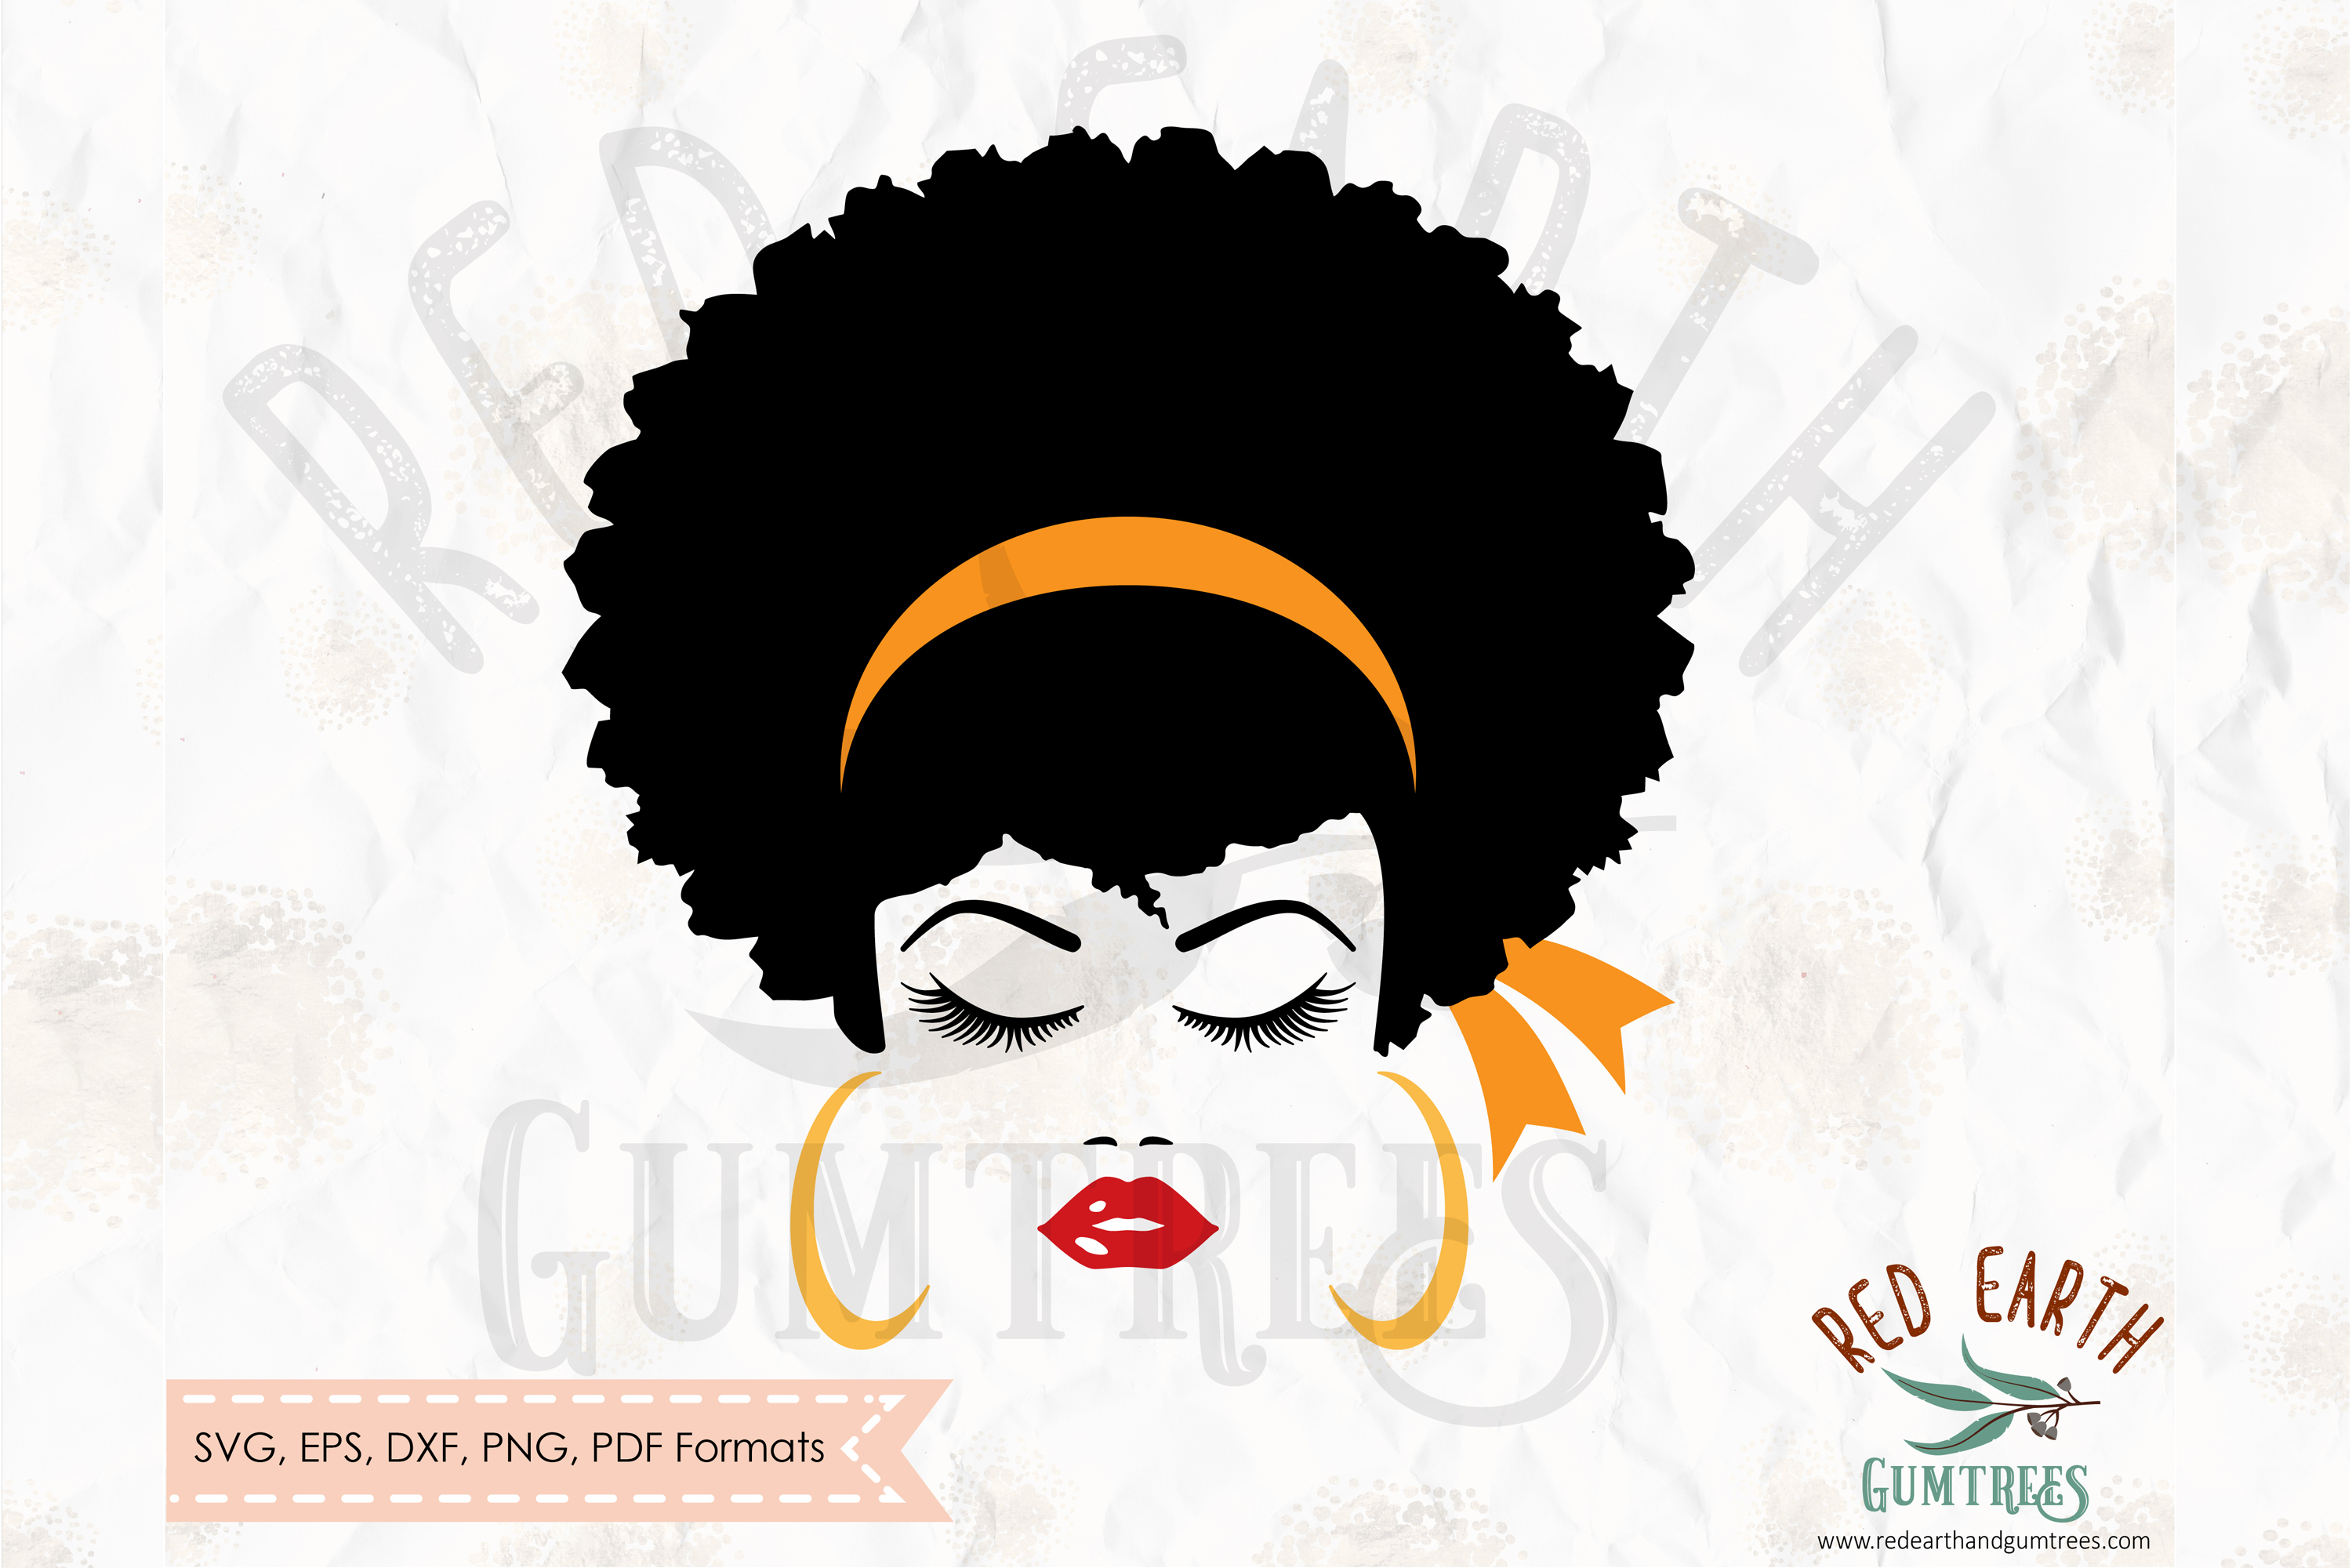 Download Afro hair woman with lashes and lips in SVG, DXF, PNG, EPS